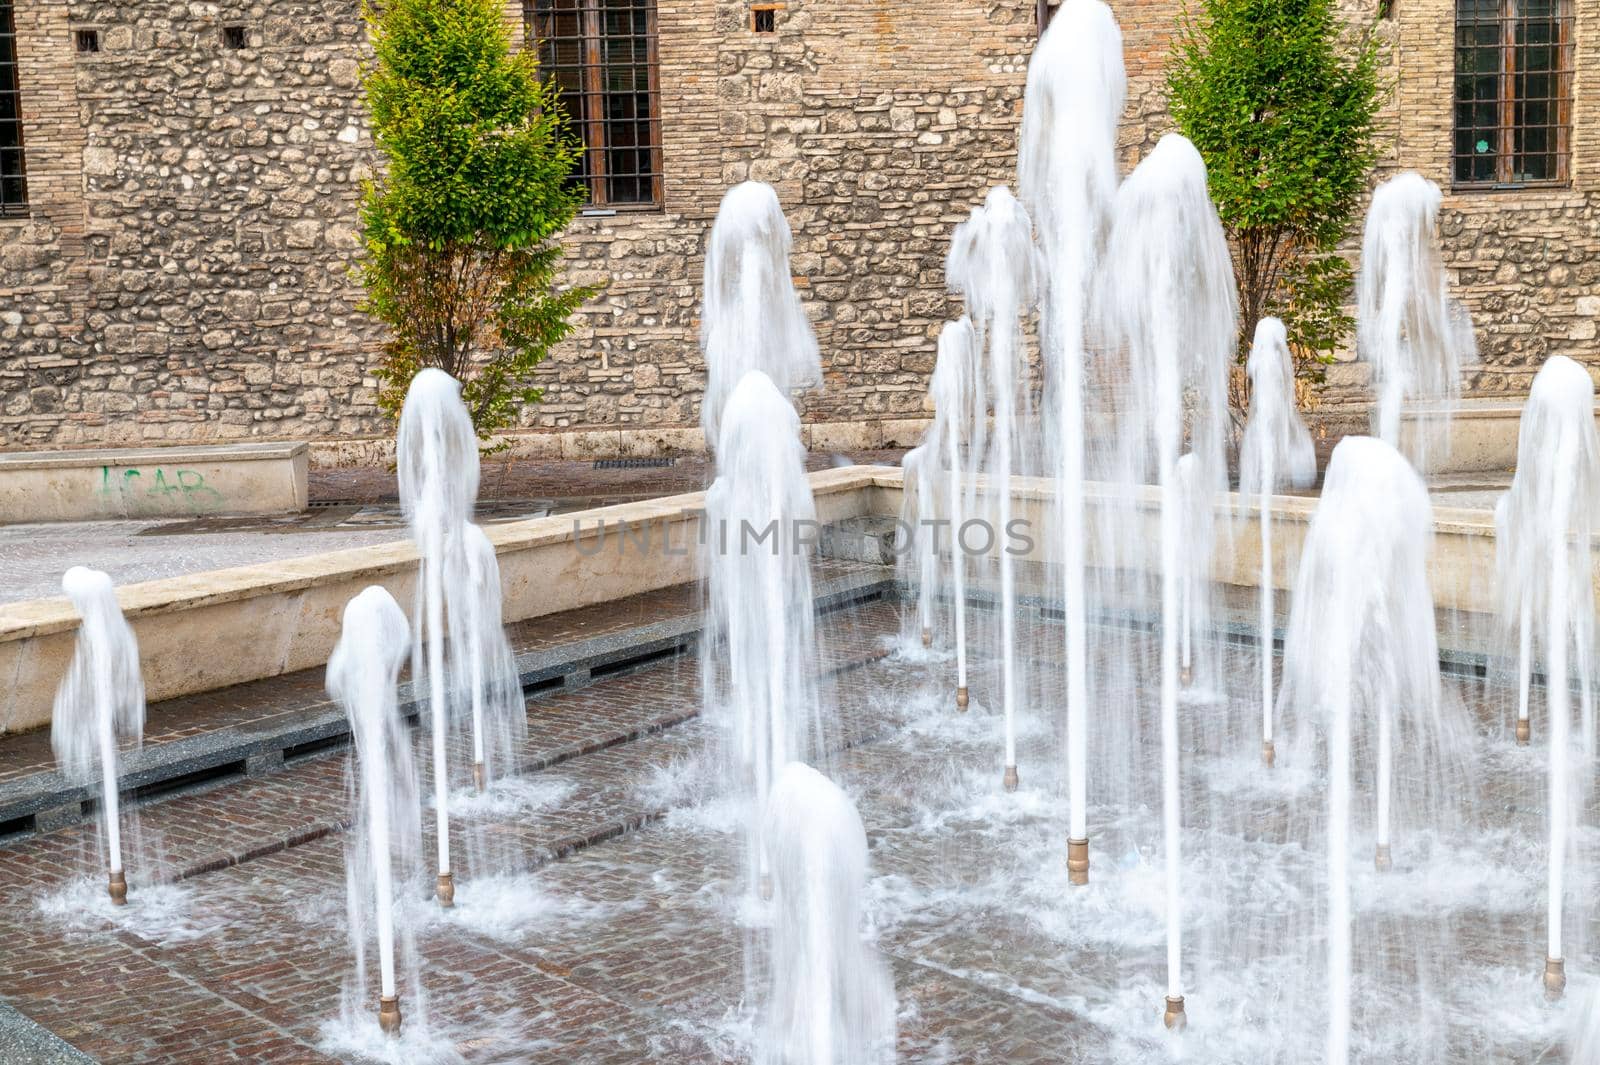 new restored fountain in piazza europa by carfedeph